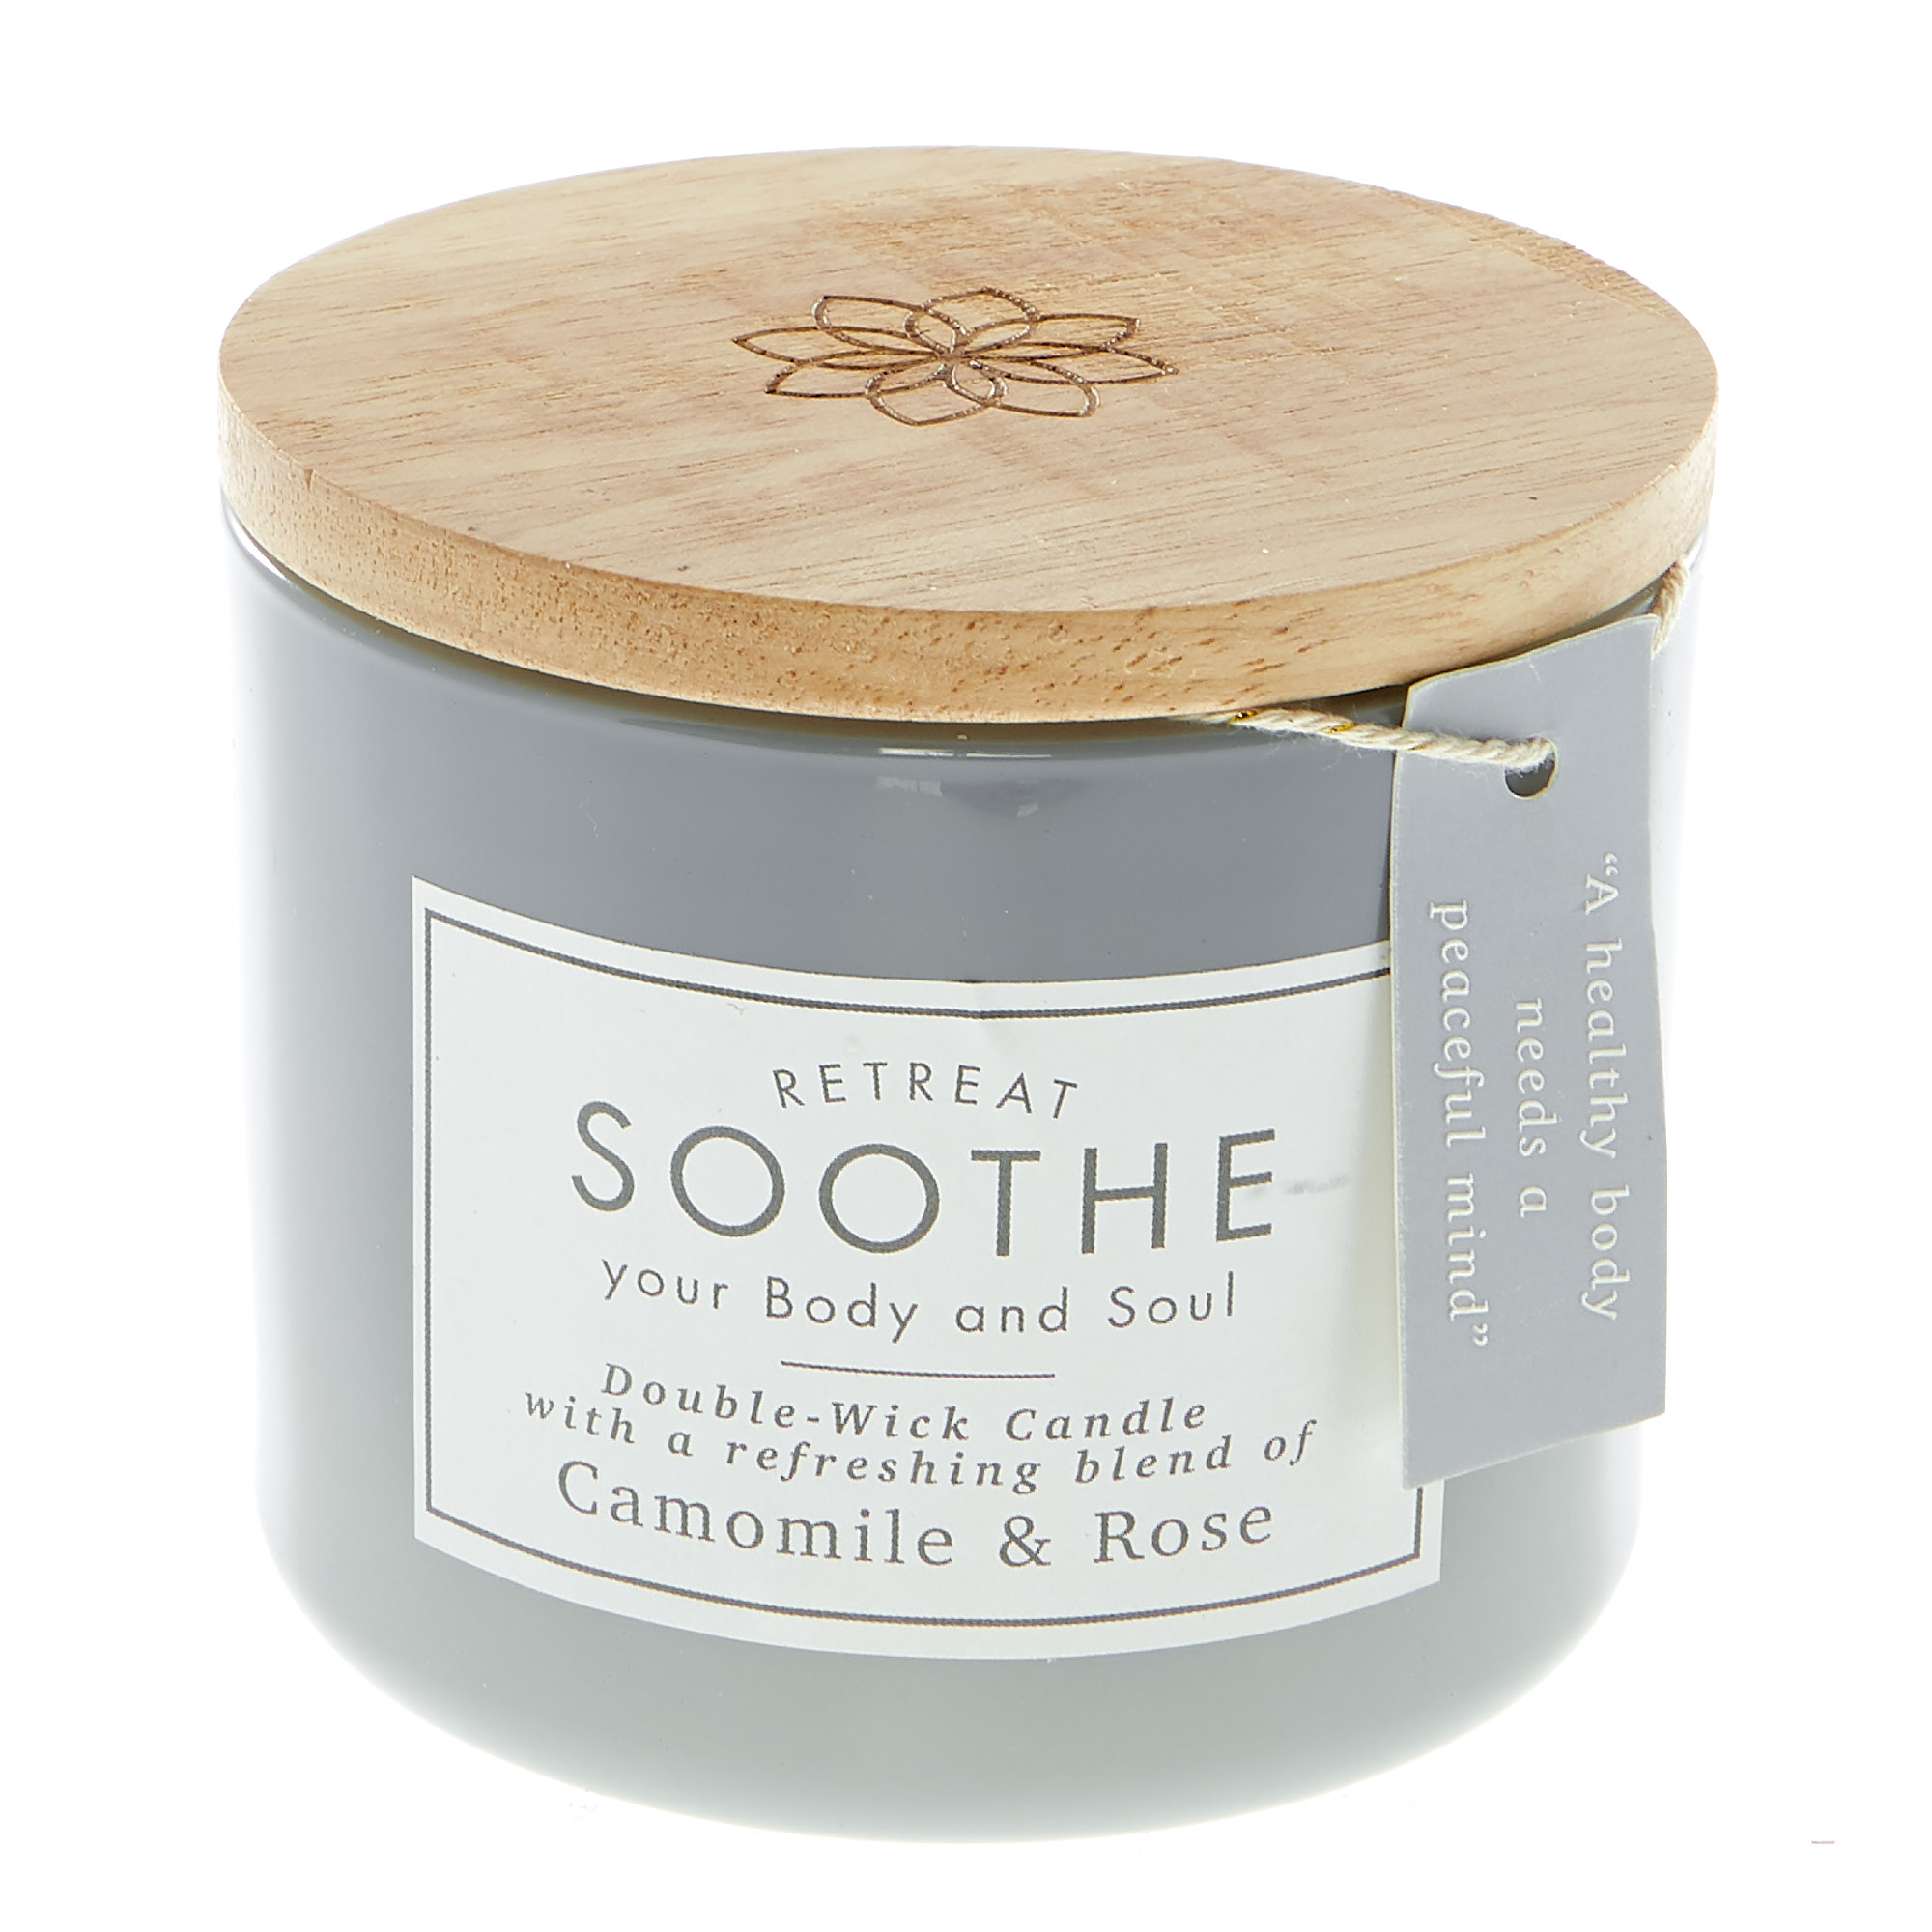 Camomile & Rose Double-Wick Scented Candle